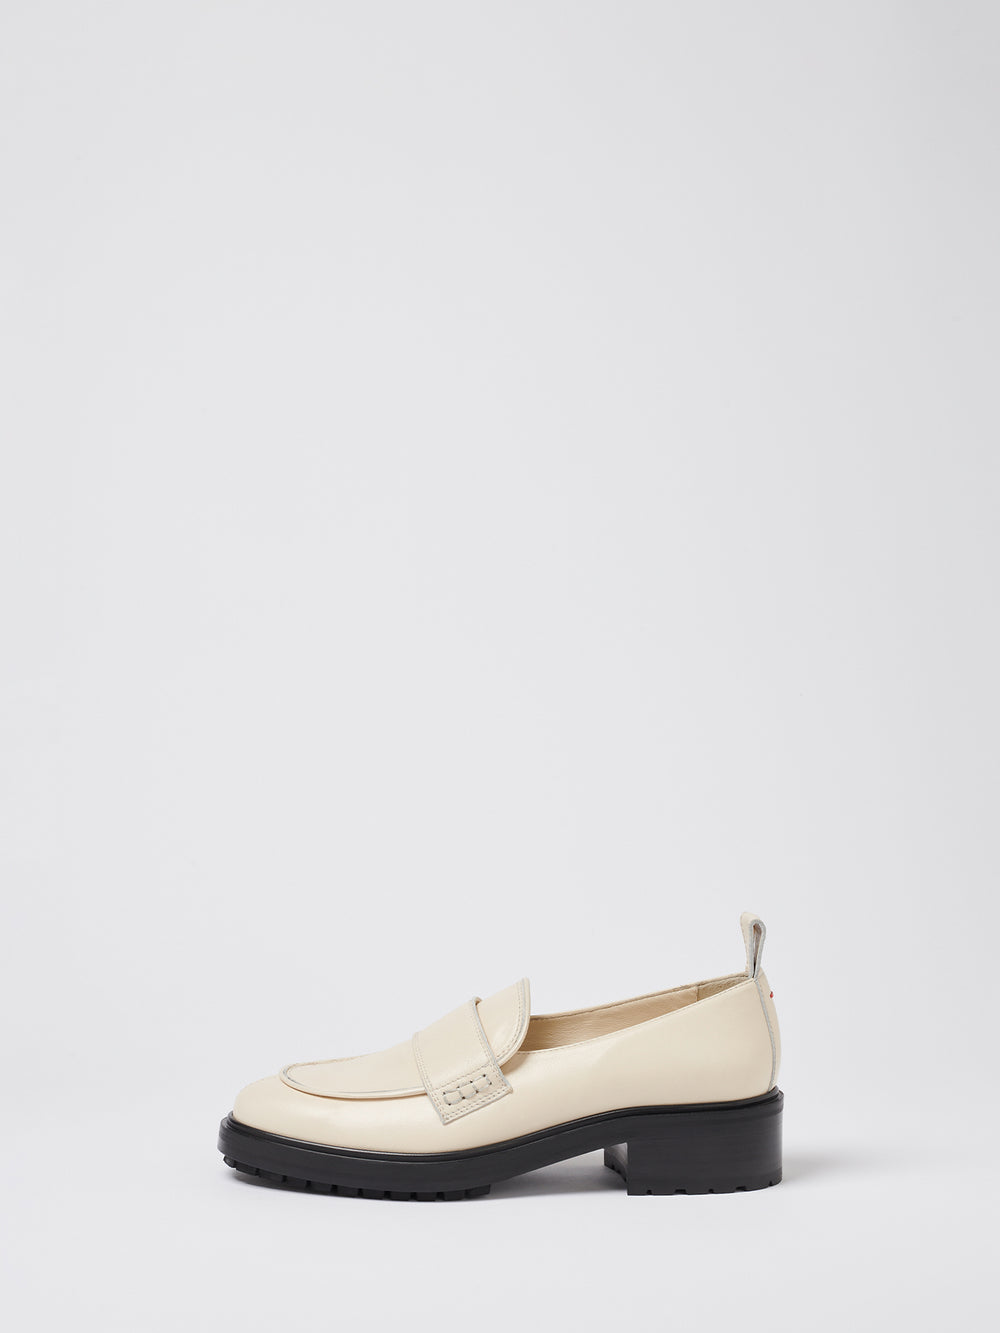 Aeyde | RUTH Black Leather Flat